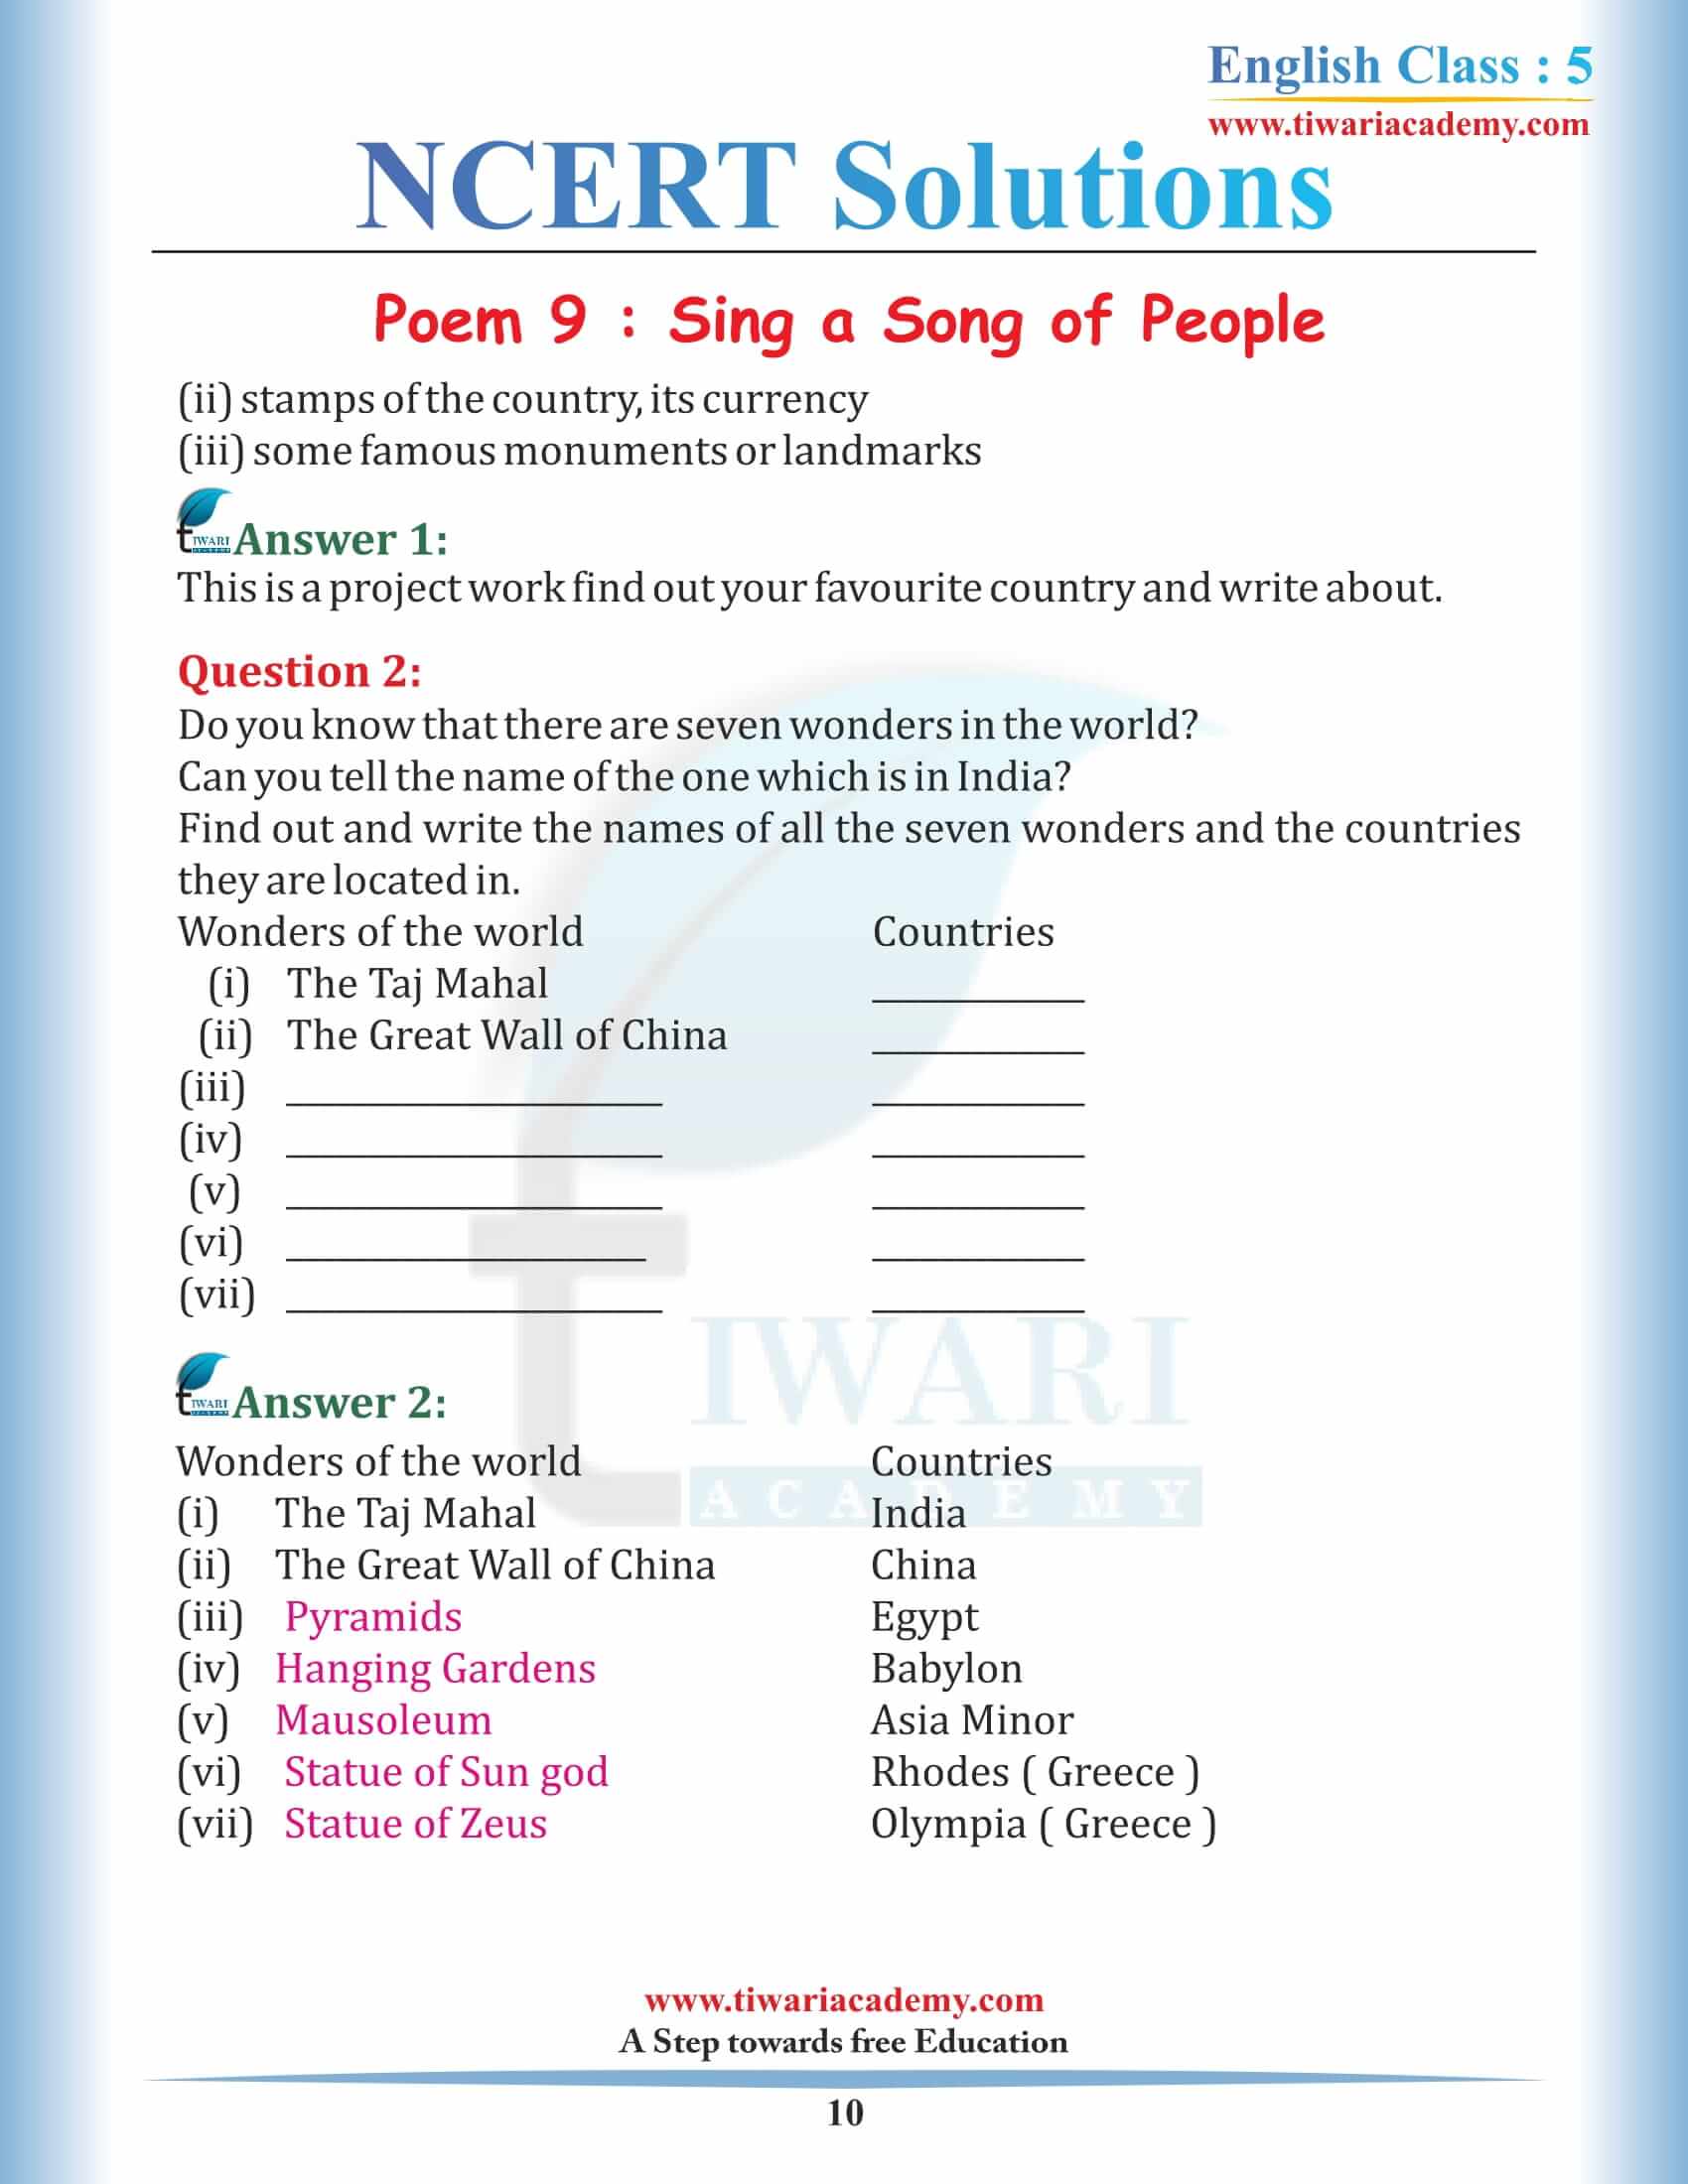 NCERT Solutions for Class 5 English Chapter 9 PDF